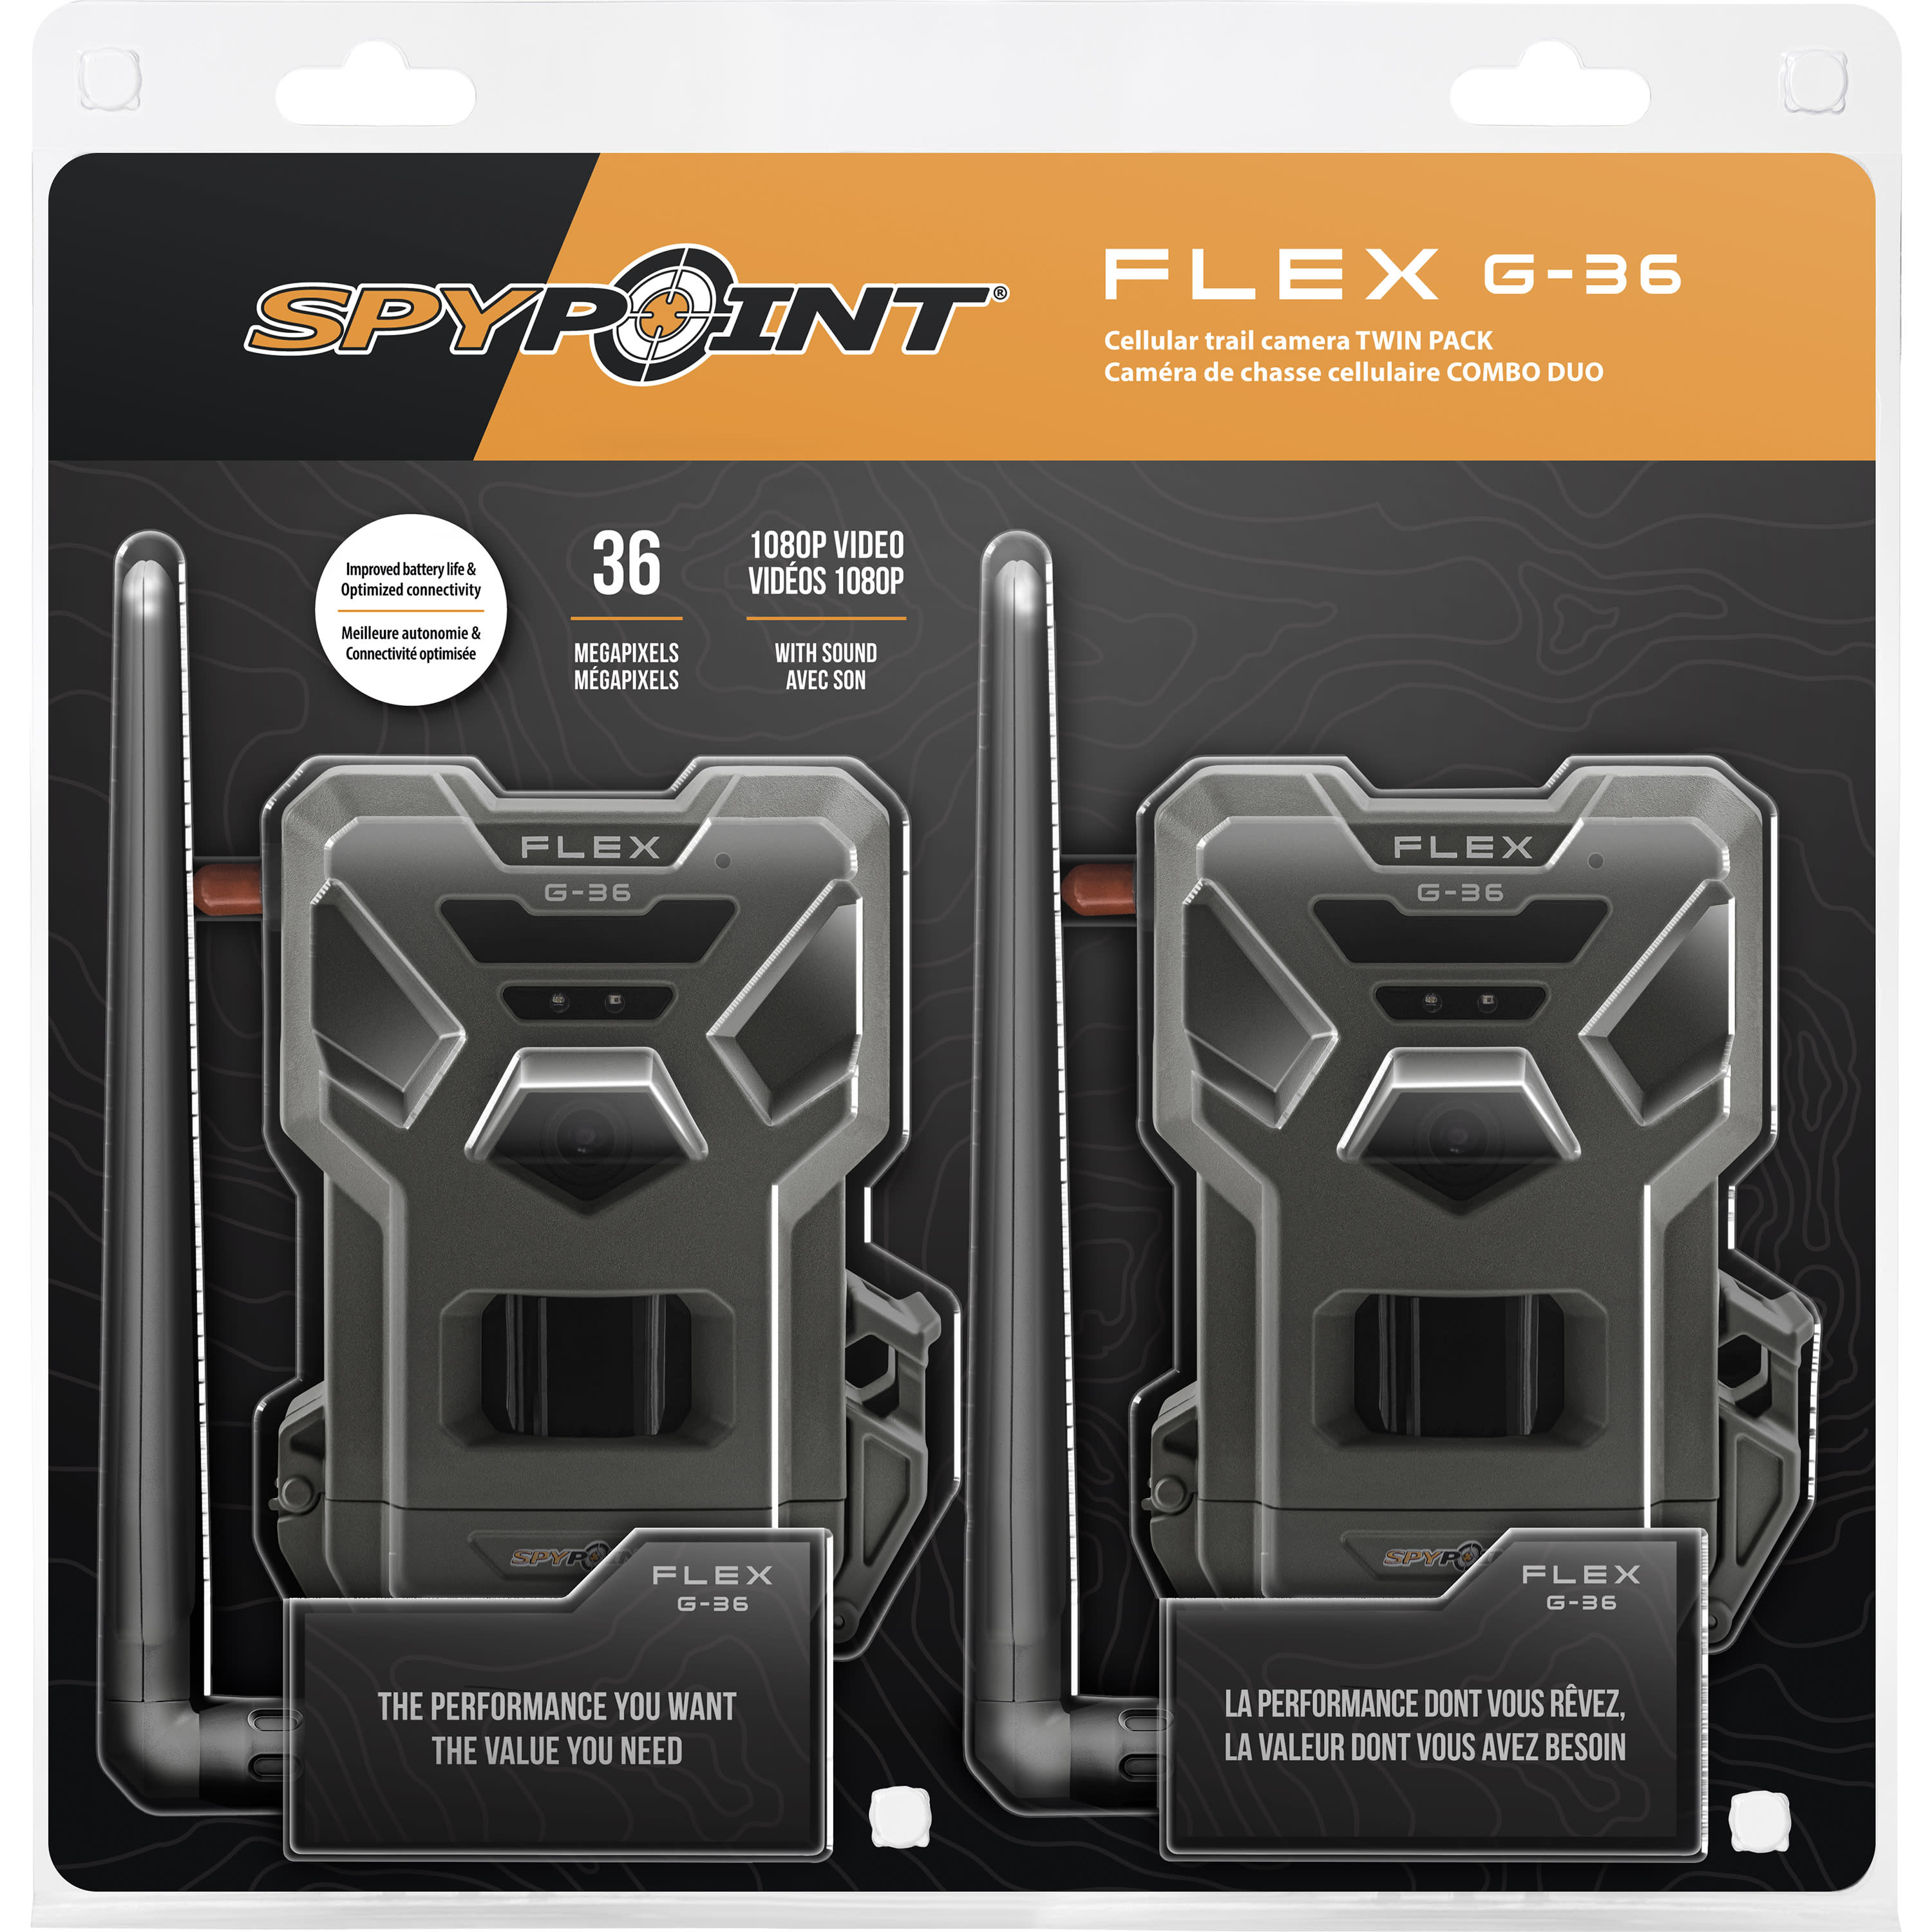 SPYPOINT FLEX G-36 Cellular Trail Camera – Twin Pack